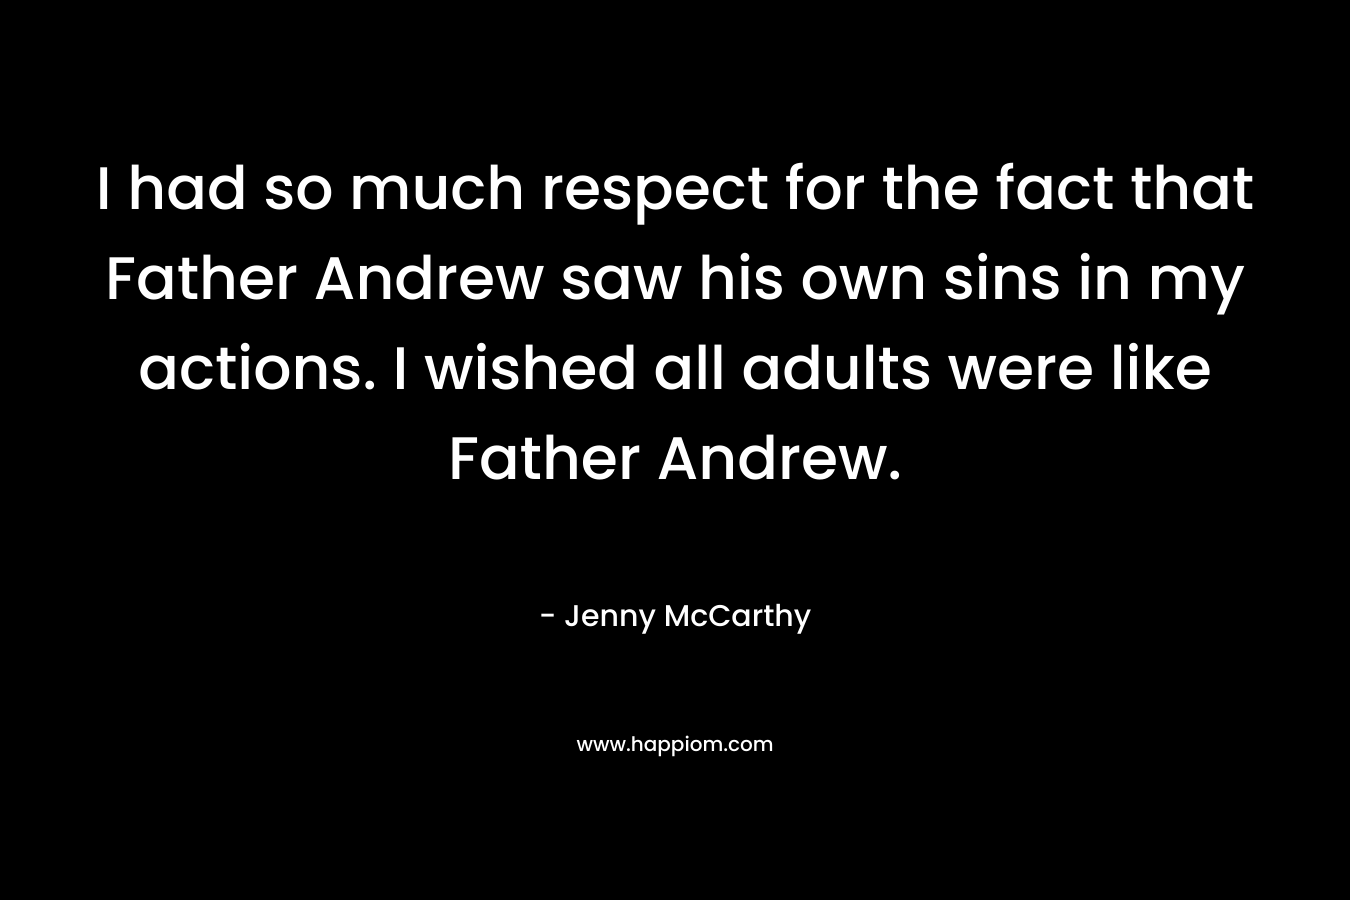 I had so much respect for the fact that Father Andrew saw his own sins in my actions. I wished all adults were like Father Andrew.